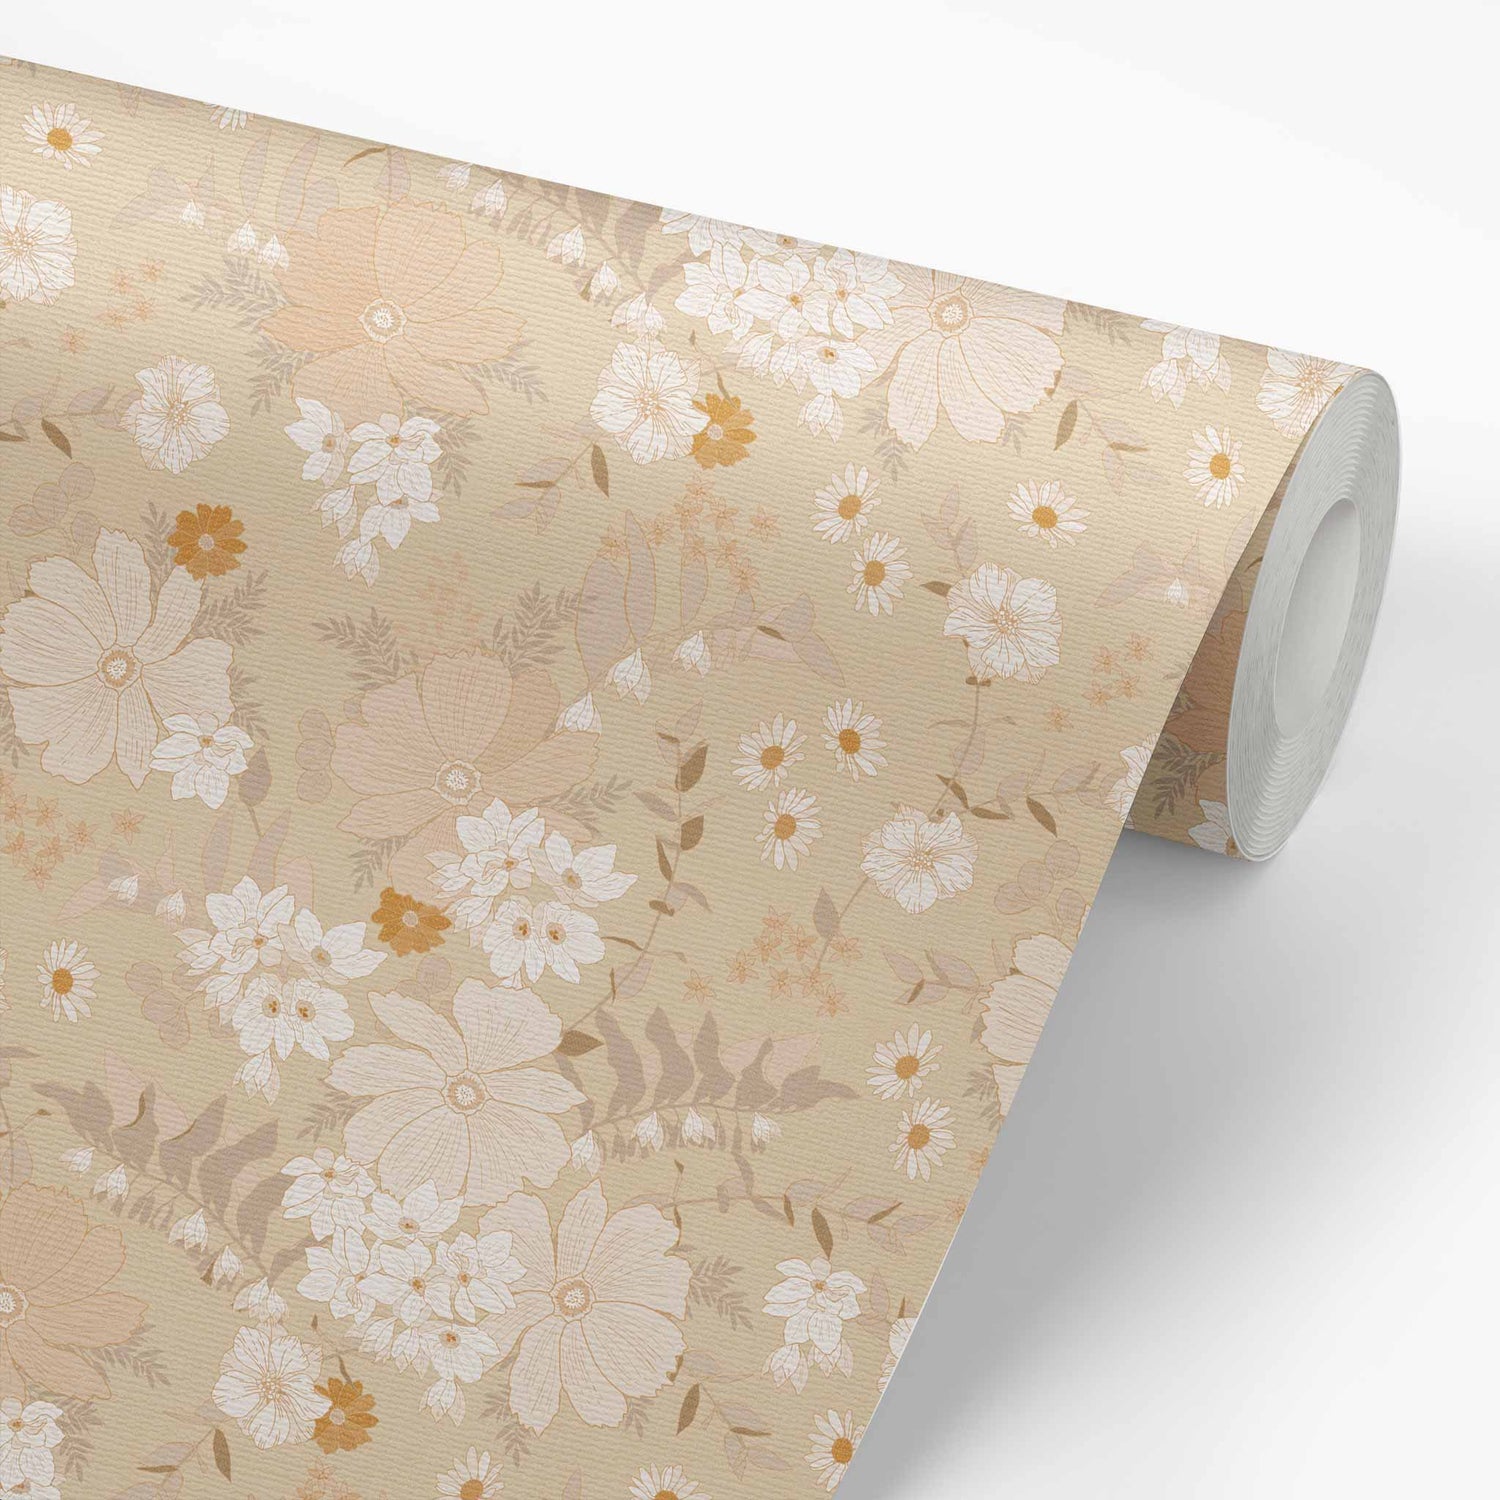 Liven up your living space with this beautiful beige wallpaper featuring elegant spring floral blooms! Put the finishing touch on your décor and enjoy the calming sight of these gorgeous flowers all year round.